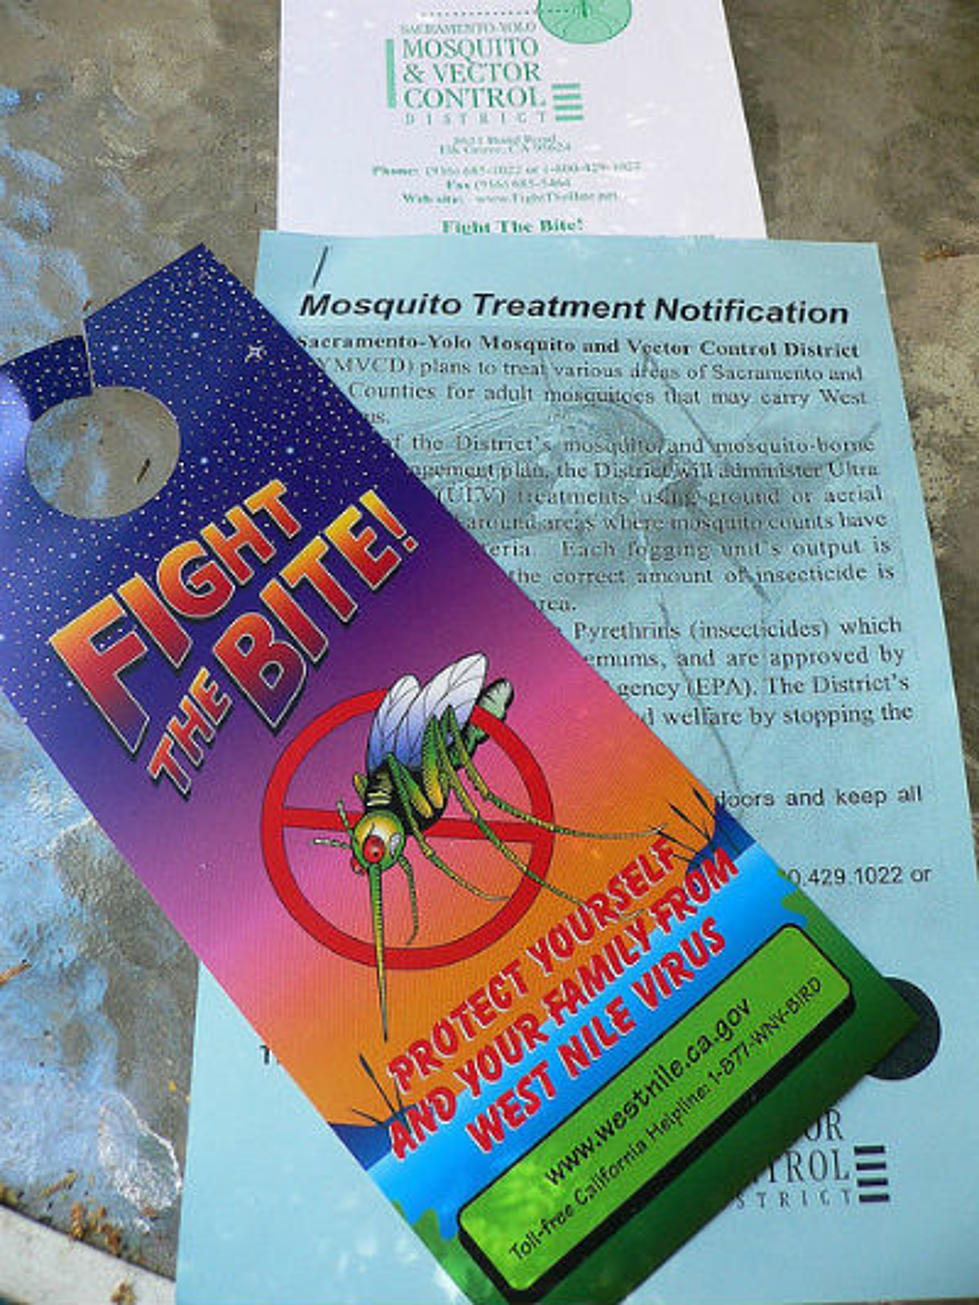 West Nile Virus Mosquitoes Spreading in Franklin County – Another Detection This Week